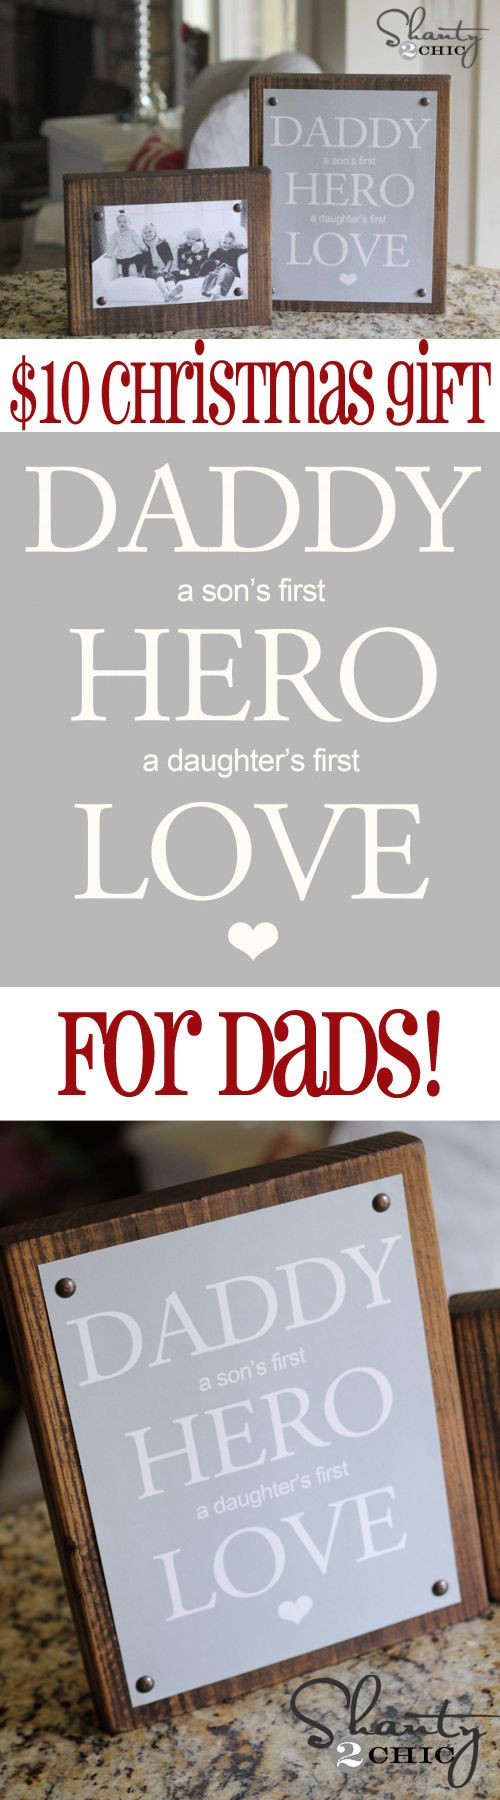 DIY Gift For Dad Christmas
 Easy DIY Christmas Gift for Dad from Shanty 2 Chic